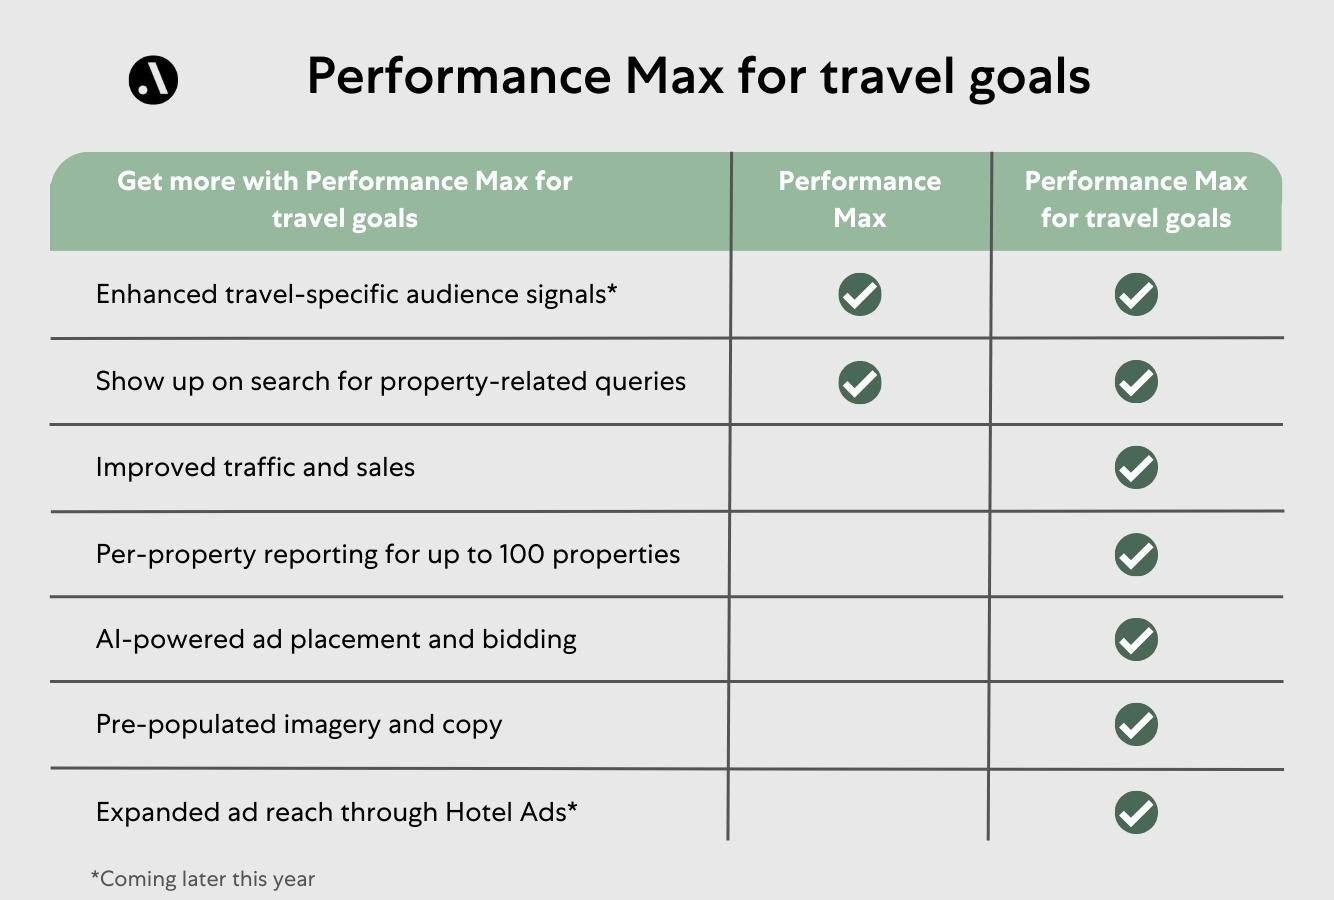 Performance Max for travel goals vs. default Performance Max campaigns